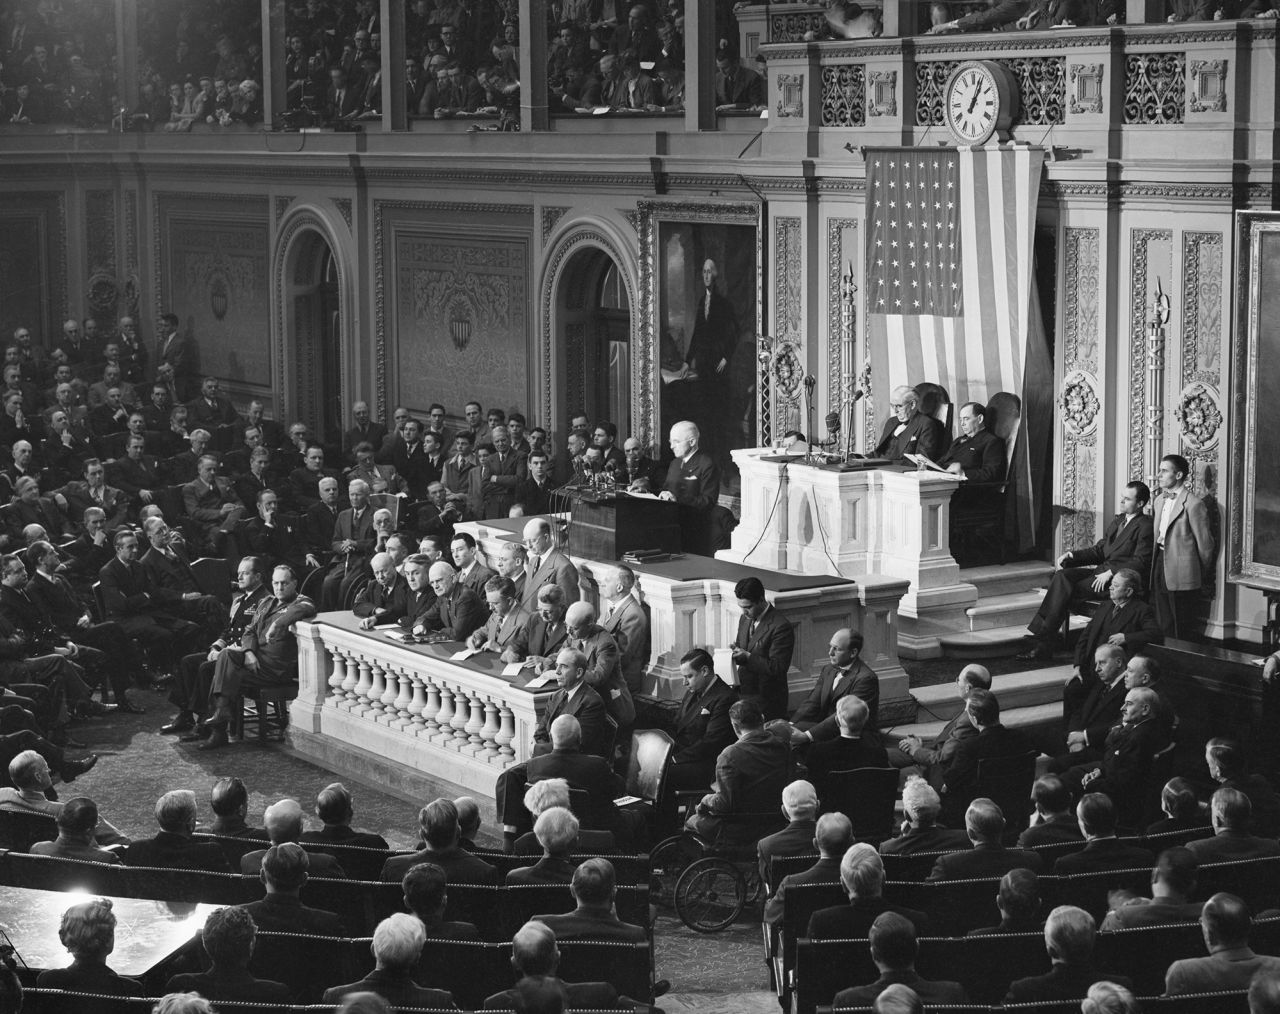 President Harry Truman delivers his annual message in Washington in 1947. Truman's address was the first to be broadcast on television, and it was the first year the message was officially known as the State of the Union address.